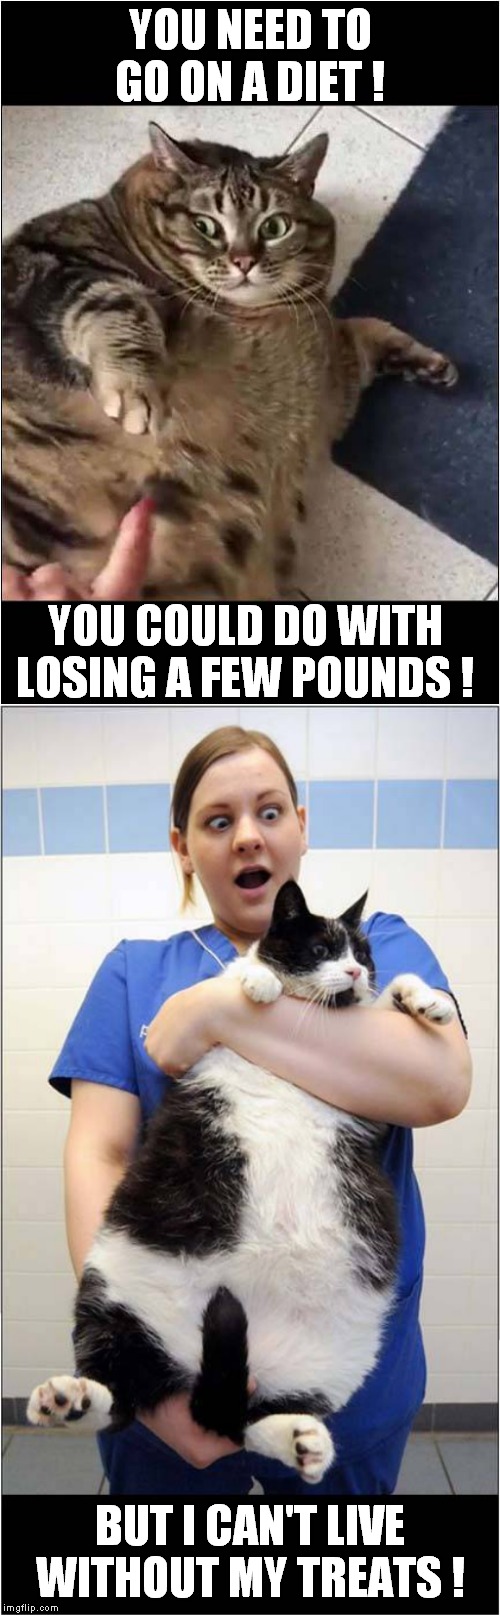 Fat Cats ! | YOU NEED TO GO ON A DIET ! YOU COULD DO WITH LOSING A FEW POUNDS ! BUT I CAN'T LIVE WITHOUT MY TREATS ! | image tagged in cats,fat cats,dieting | made w/ Imgflip meme maker